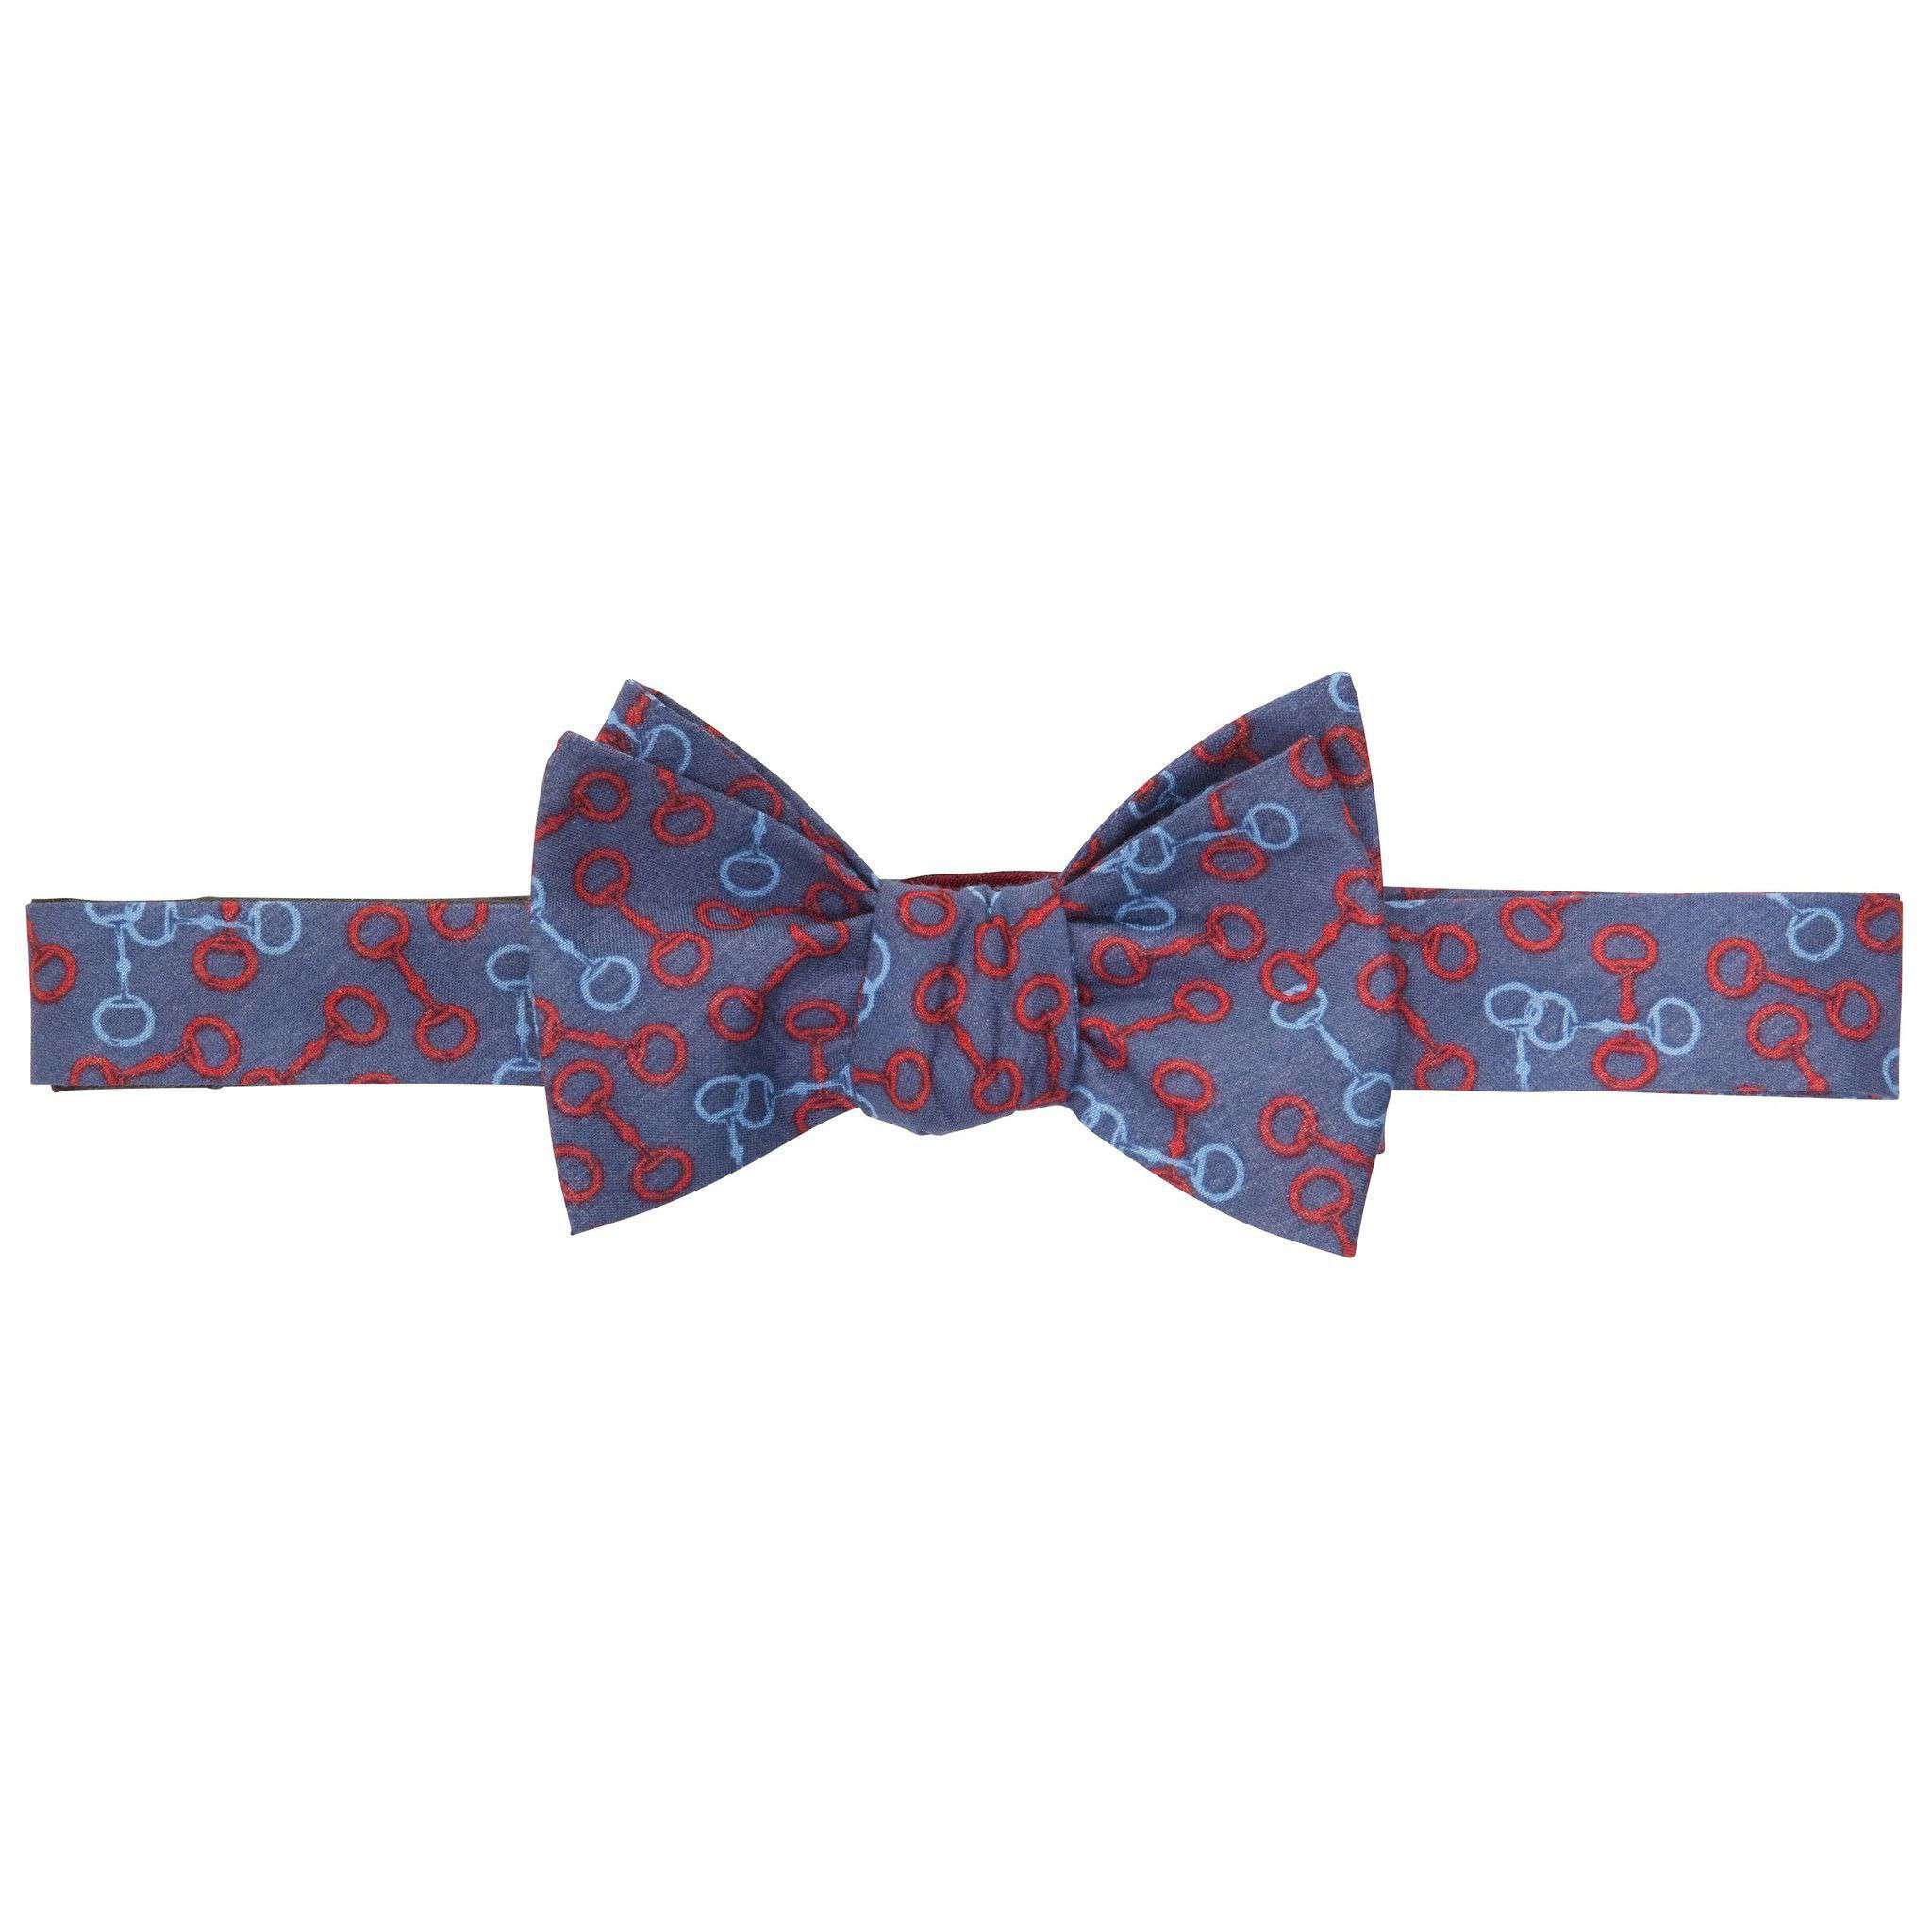 Bit O' Derby Bow Tie in Navy and Red by Southern Proper - Country Club Prep